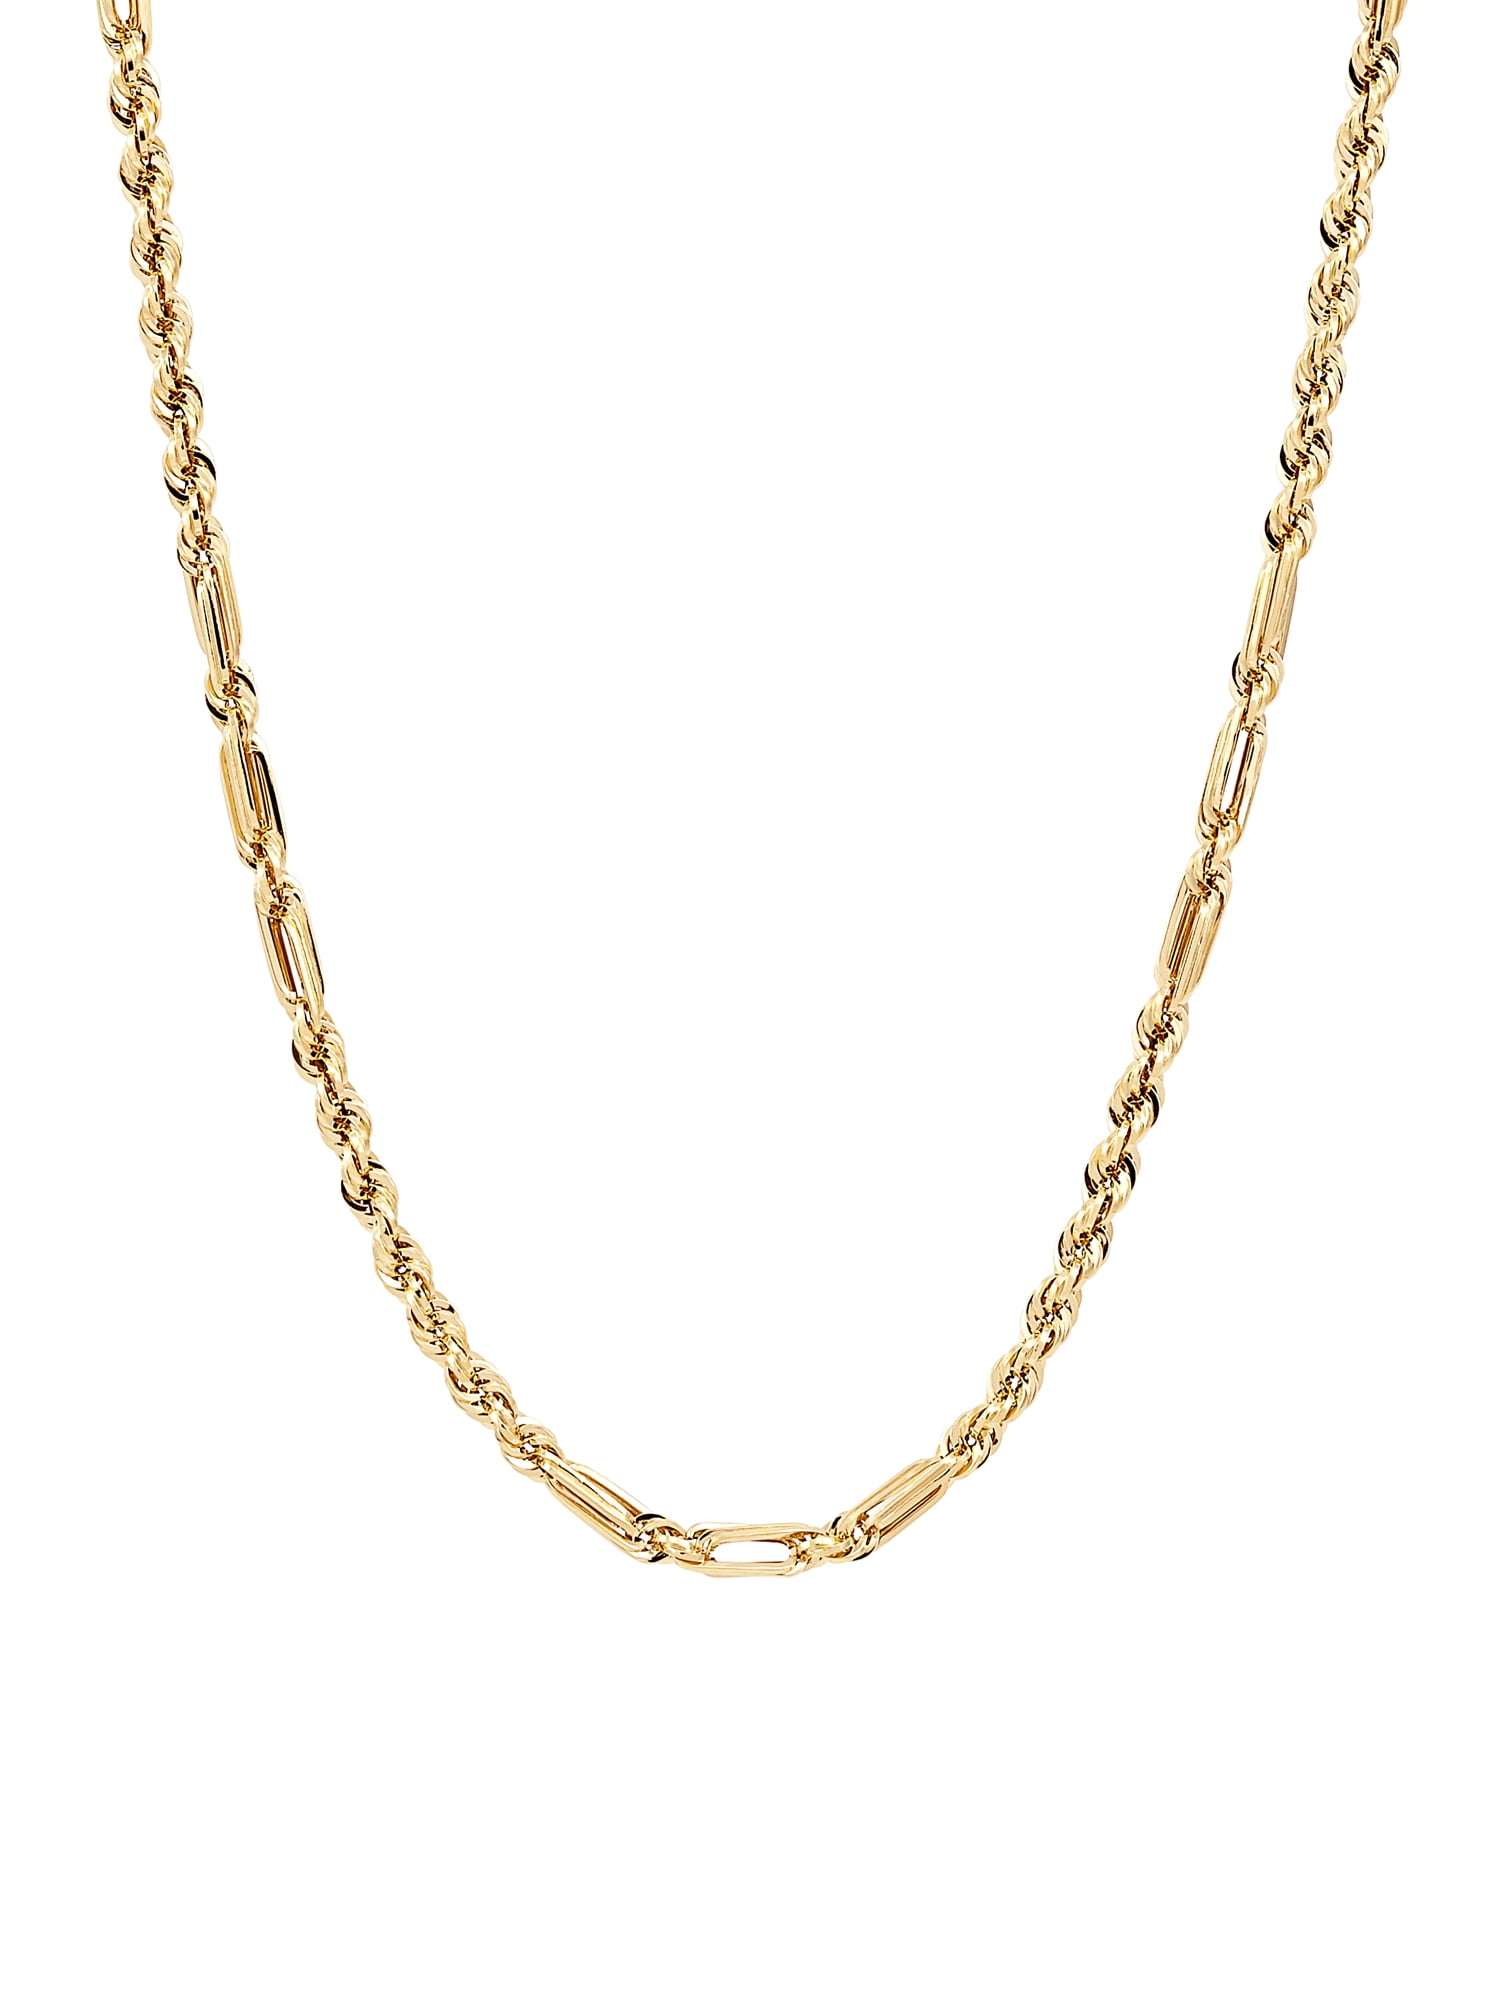 Brilliance Fine Jewelry 10K Yellow Gold Hollow 4.0MM Milano Rope Necklace, 20"